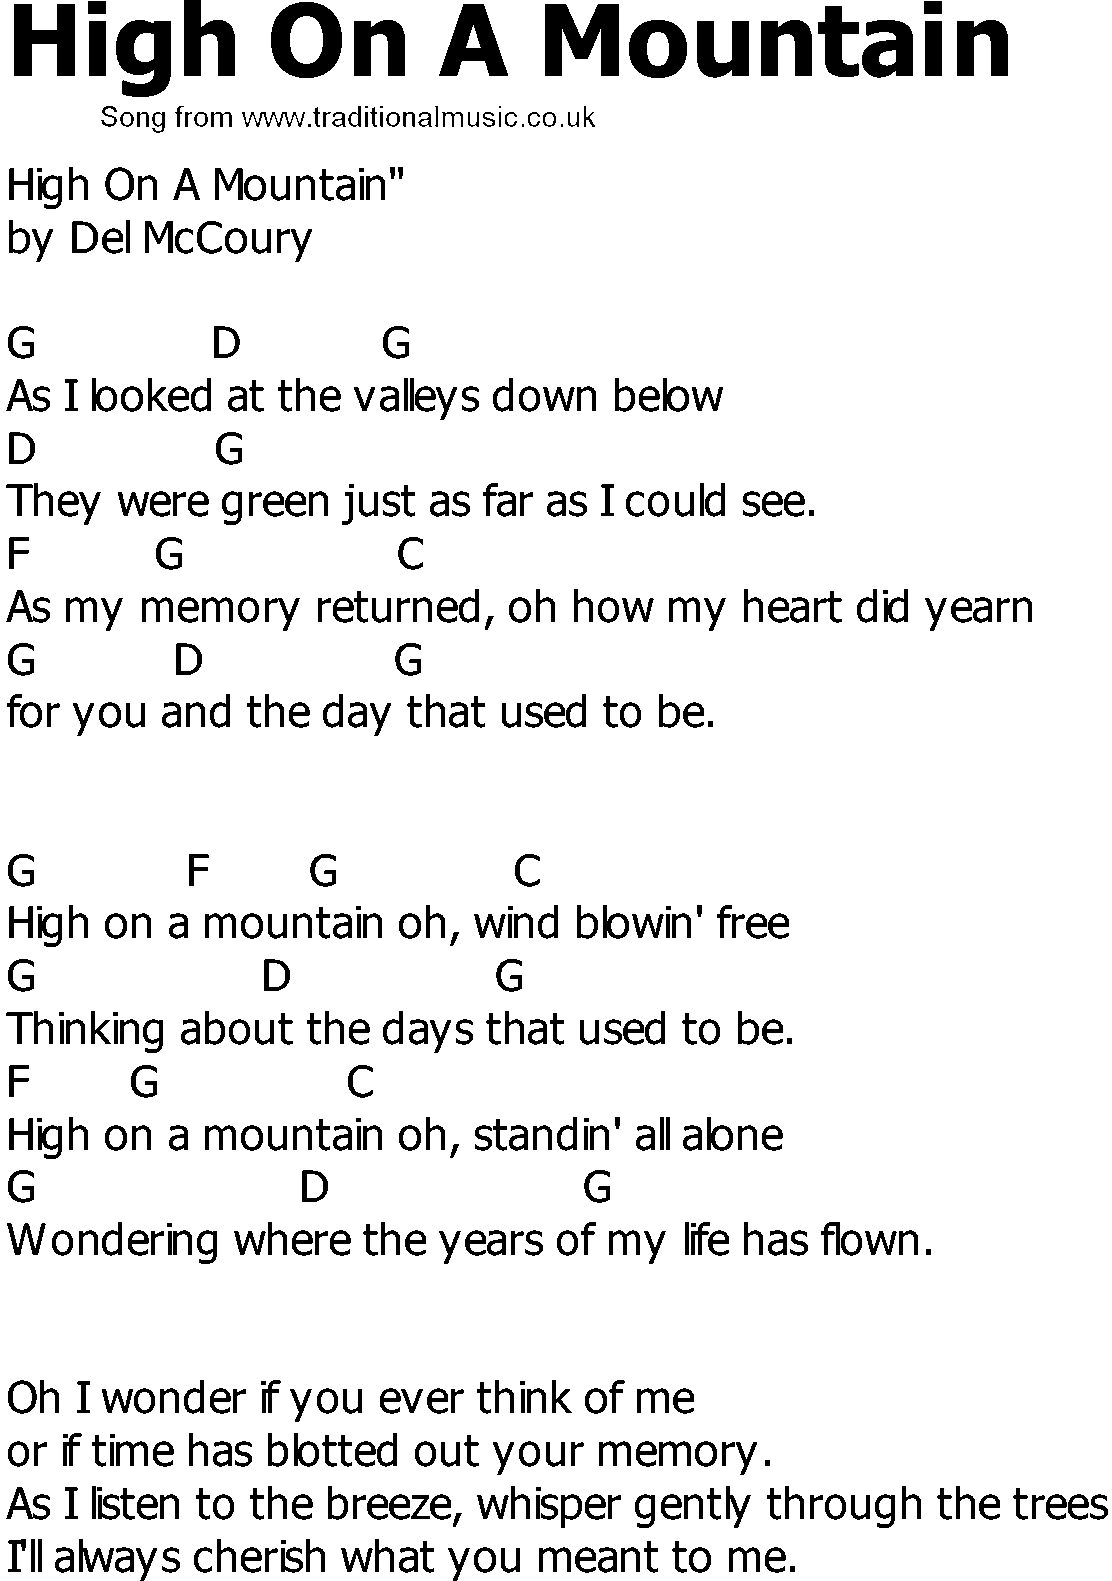 Old Country song lyrics with chords - High On A Mountain